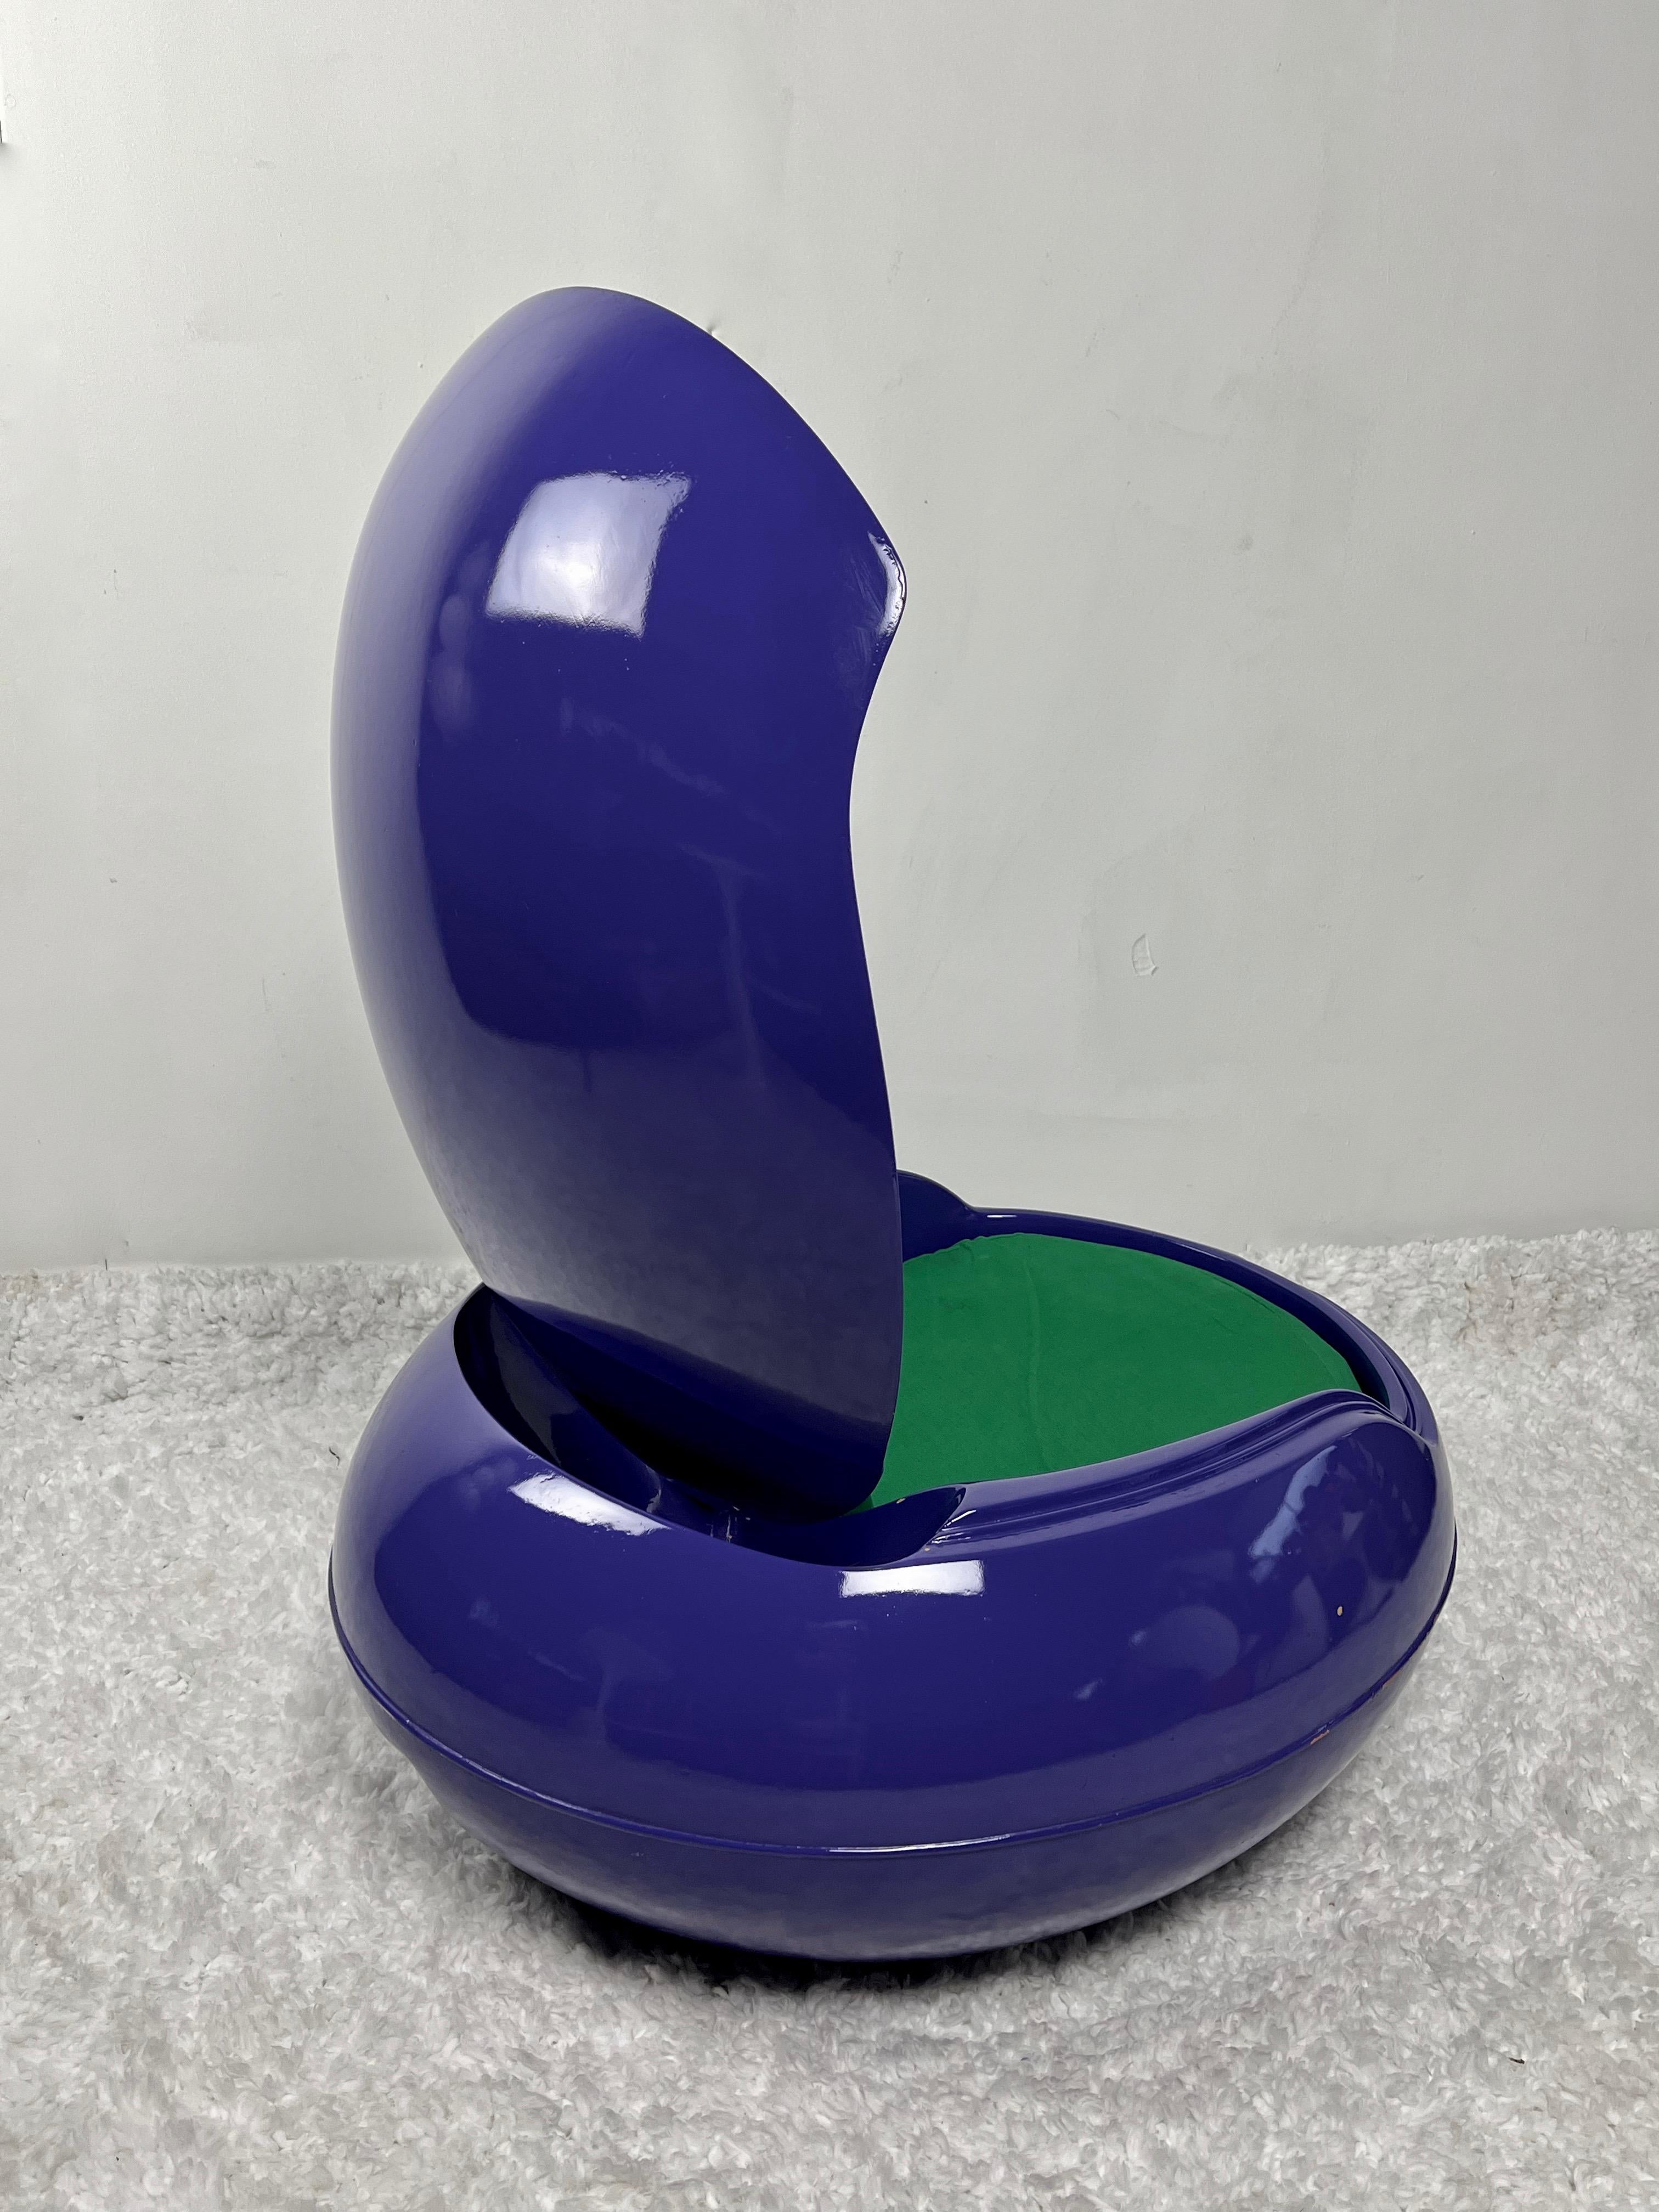 The Garden Egg chair (model name GN 01) was designed by the Hungarian émigré Peter Ghyczy, who started his working career as chief designer for the polyurethane factory 'Elastogran GmbH' in Lemförde (West Germany). He was responsible for setting up